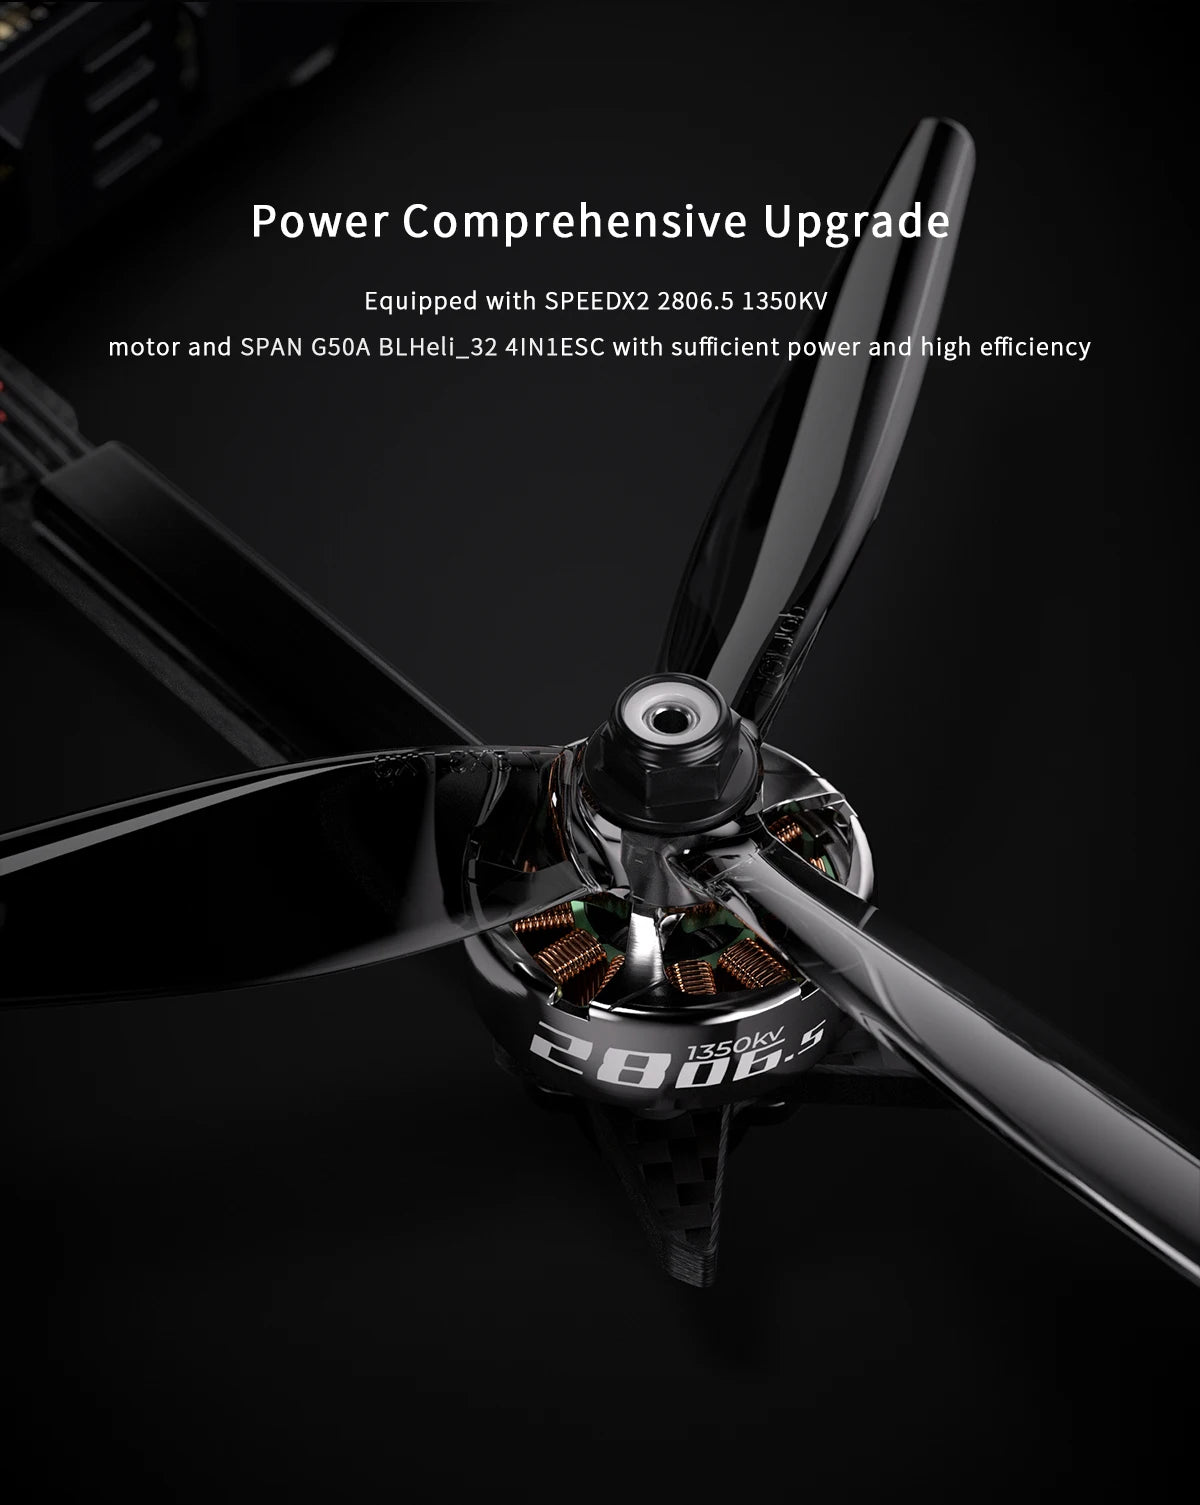 GEPRC Crocodile75 V3 HD, Power Comprehensive Upgrade Equipped with SPEEDX2 2806.5 1350KV motor